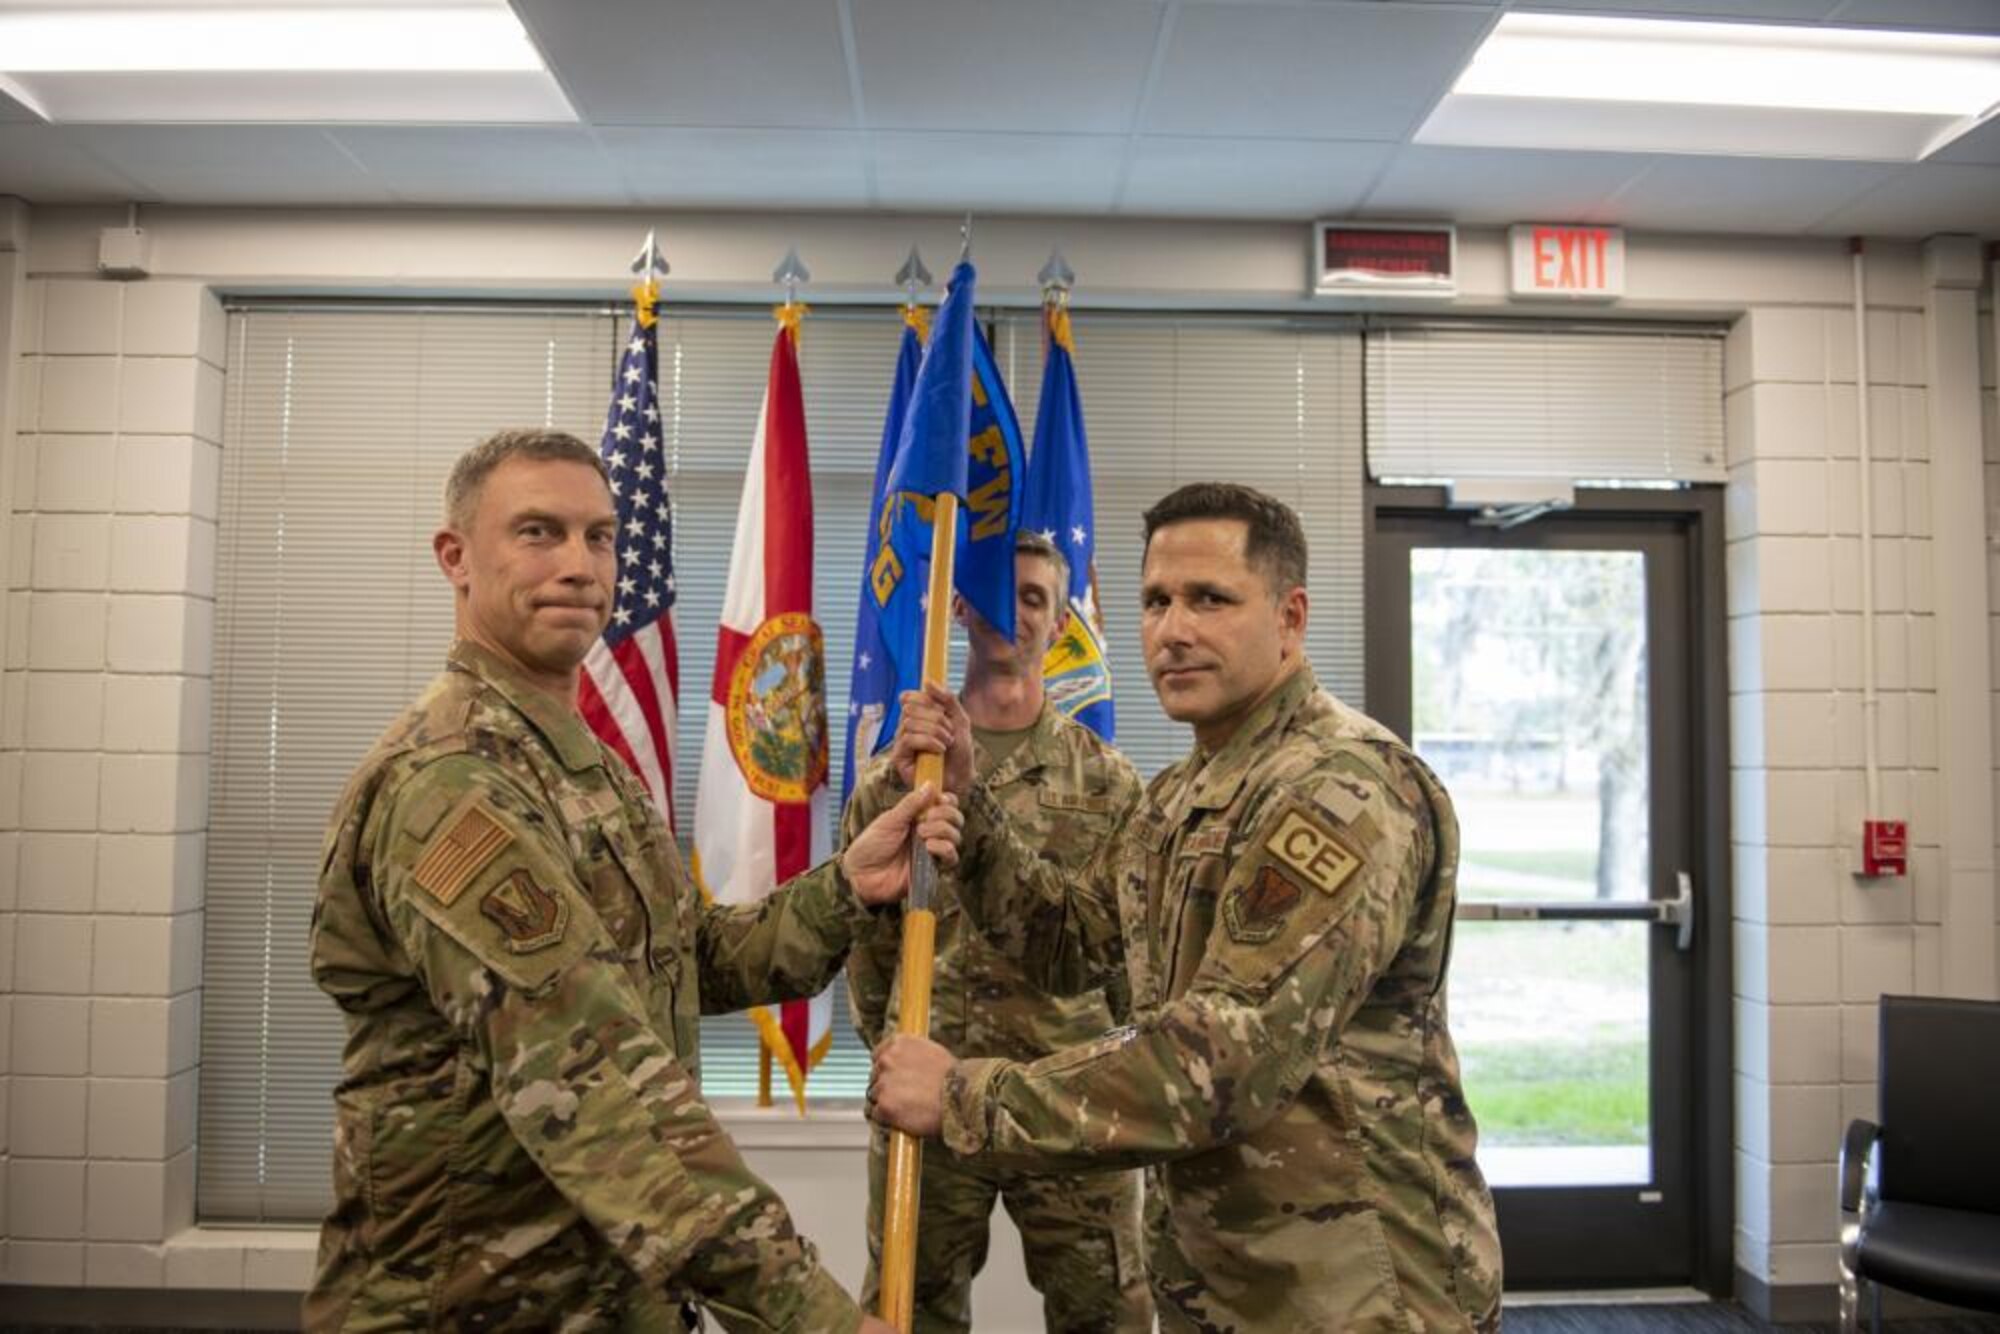 U.S. Air Force Col. George Downs, 125th Fighter Wing commander, passes the 125th Regional Support Group guidon to Col. Brian Vitetta, 125th RSG commander, at the activation ceremony for the 125th RSG held at Camp Blanding Joint Training Center in Starke, Florida, Feb. 24, 2023. The 125th RSG activated Jan. 15, 2023, under the 125th Fighter Wing, Florida Air National Guard. The group encompasses the 202nd Rapid Engineer Deployable Heavy Operational Repair Squadron Engineer (RED HORSE), 290th Joint Communications Support Squadron, 159th Weather Flight and 131st Training Flight. The formation postures the 125 FW for greater warfighting capability and increased readiness to meet the strategic threats of today and tomorrow. (U.S. Air National Guard photo by Tech Sgt. Chelsea Smith)